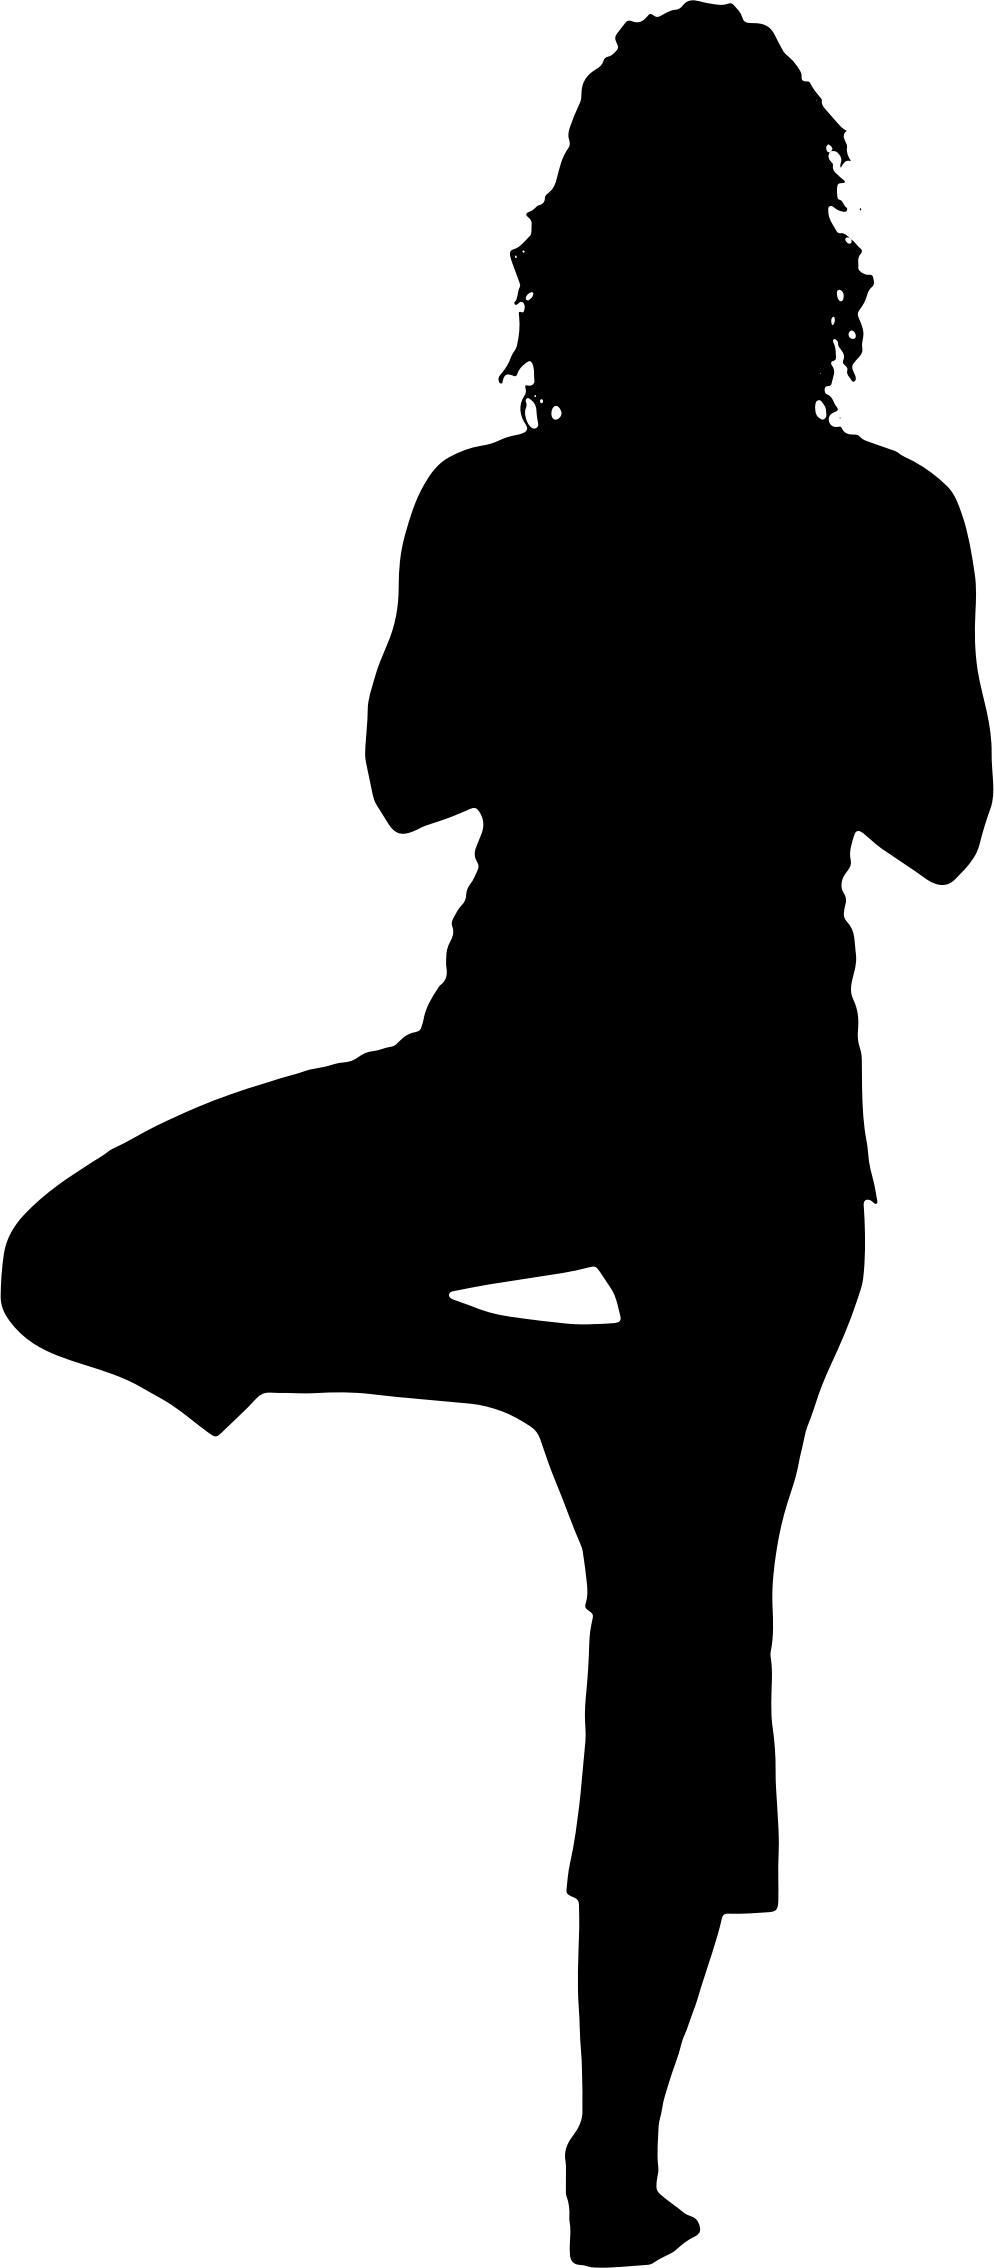 Woman Yoga Pose Silhouette png transparent